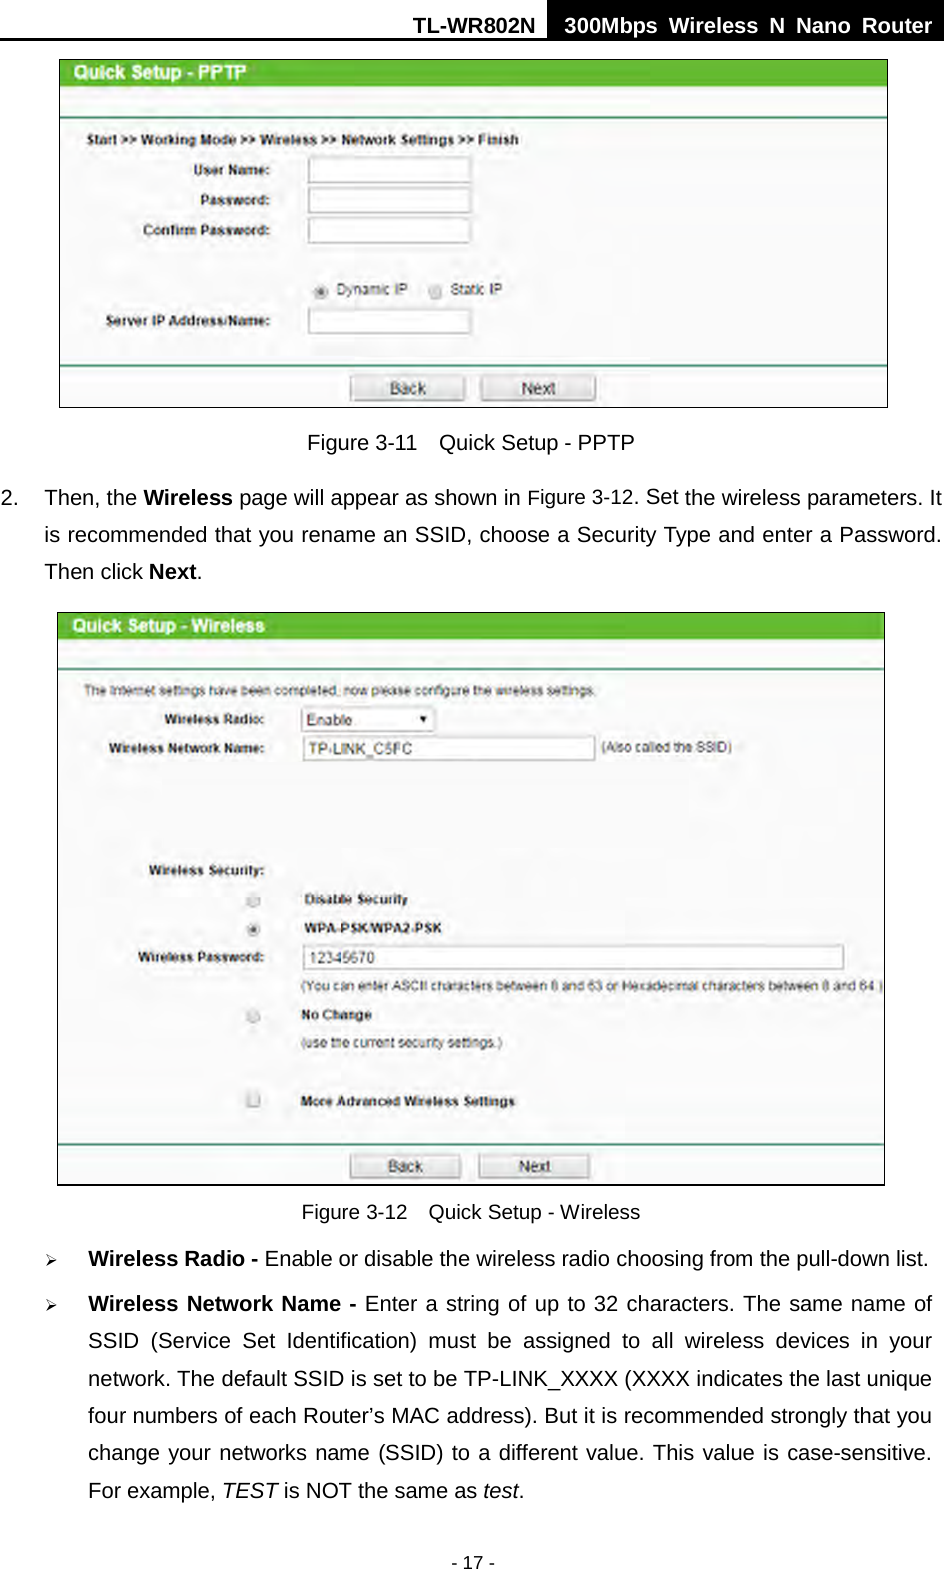 TL-WR802N  300Mbps Wireless N Nano Router   Figure 3-11  Quick Setup - PPTP 2. Then, the Wireless page will appear as shown in Figure 3-12. Set the wireless parameters. It is recommended that you rename an SSID, choose a Security Type and enter a Password. Then click Next.  Figure 3-12  Quick Setup - Wireless  Wireless Radio - Enable or disable the wireless radio choosing from the pull-down list.    Wireless Network Name - Enter a string of up to 32 characters. The same name of SSID  (Service Set Identification)  must be assigned to all wireless devices in your network. The default SSID is set to be TP-LINK_XXXX (XXXX indicates the last unique four numbers of each Router’s MAC address). But it is recommended strongly that you change your networks name (SSID) to a different value. This value is case-sensitive. For example, TEST is NOT the same as test. - 17 - 